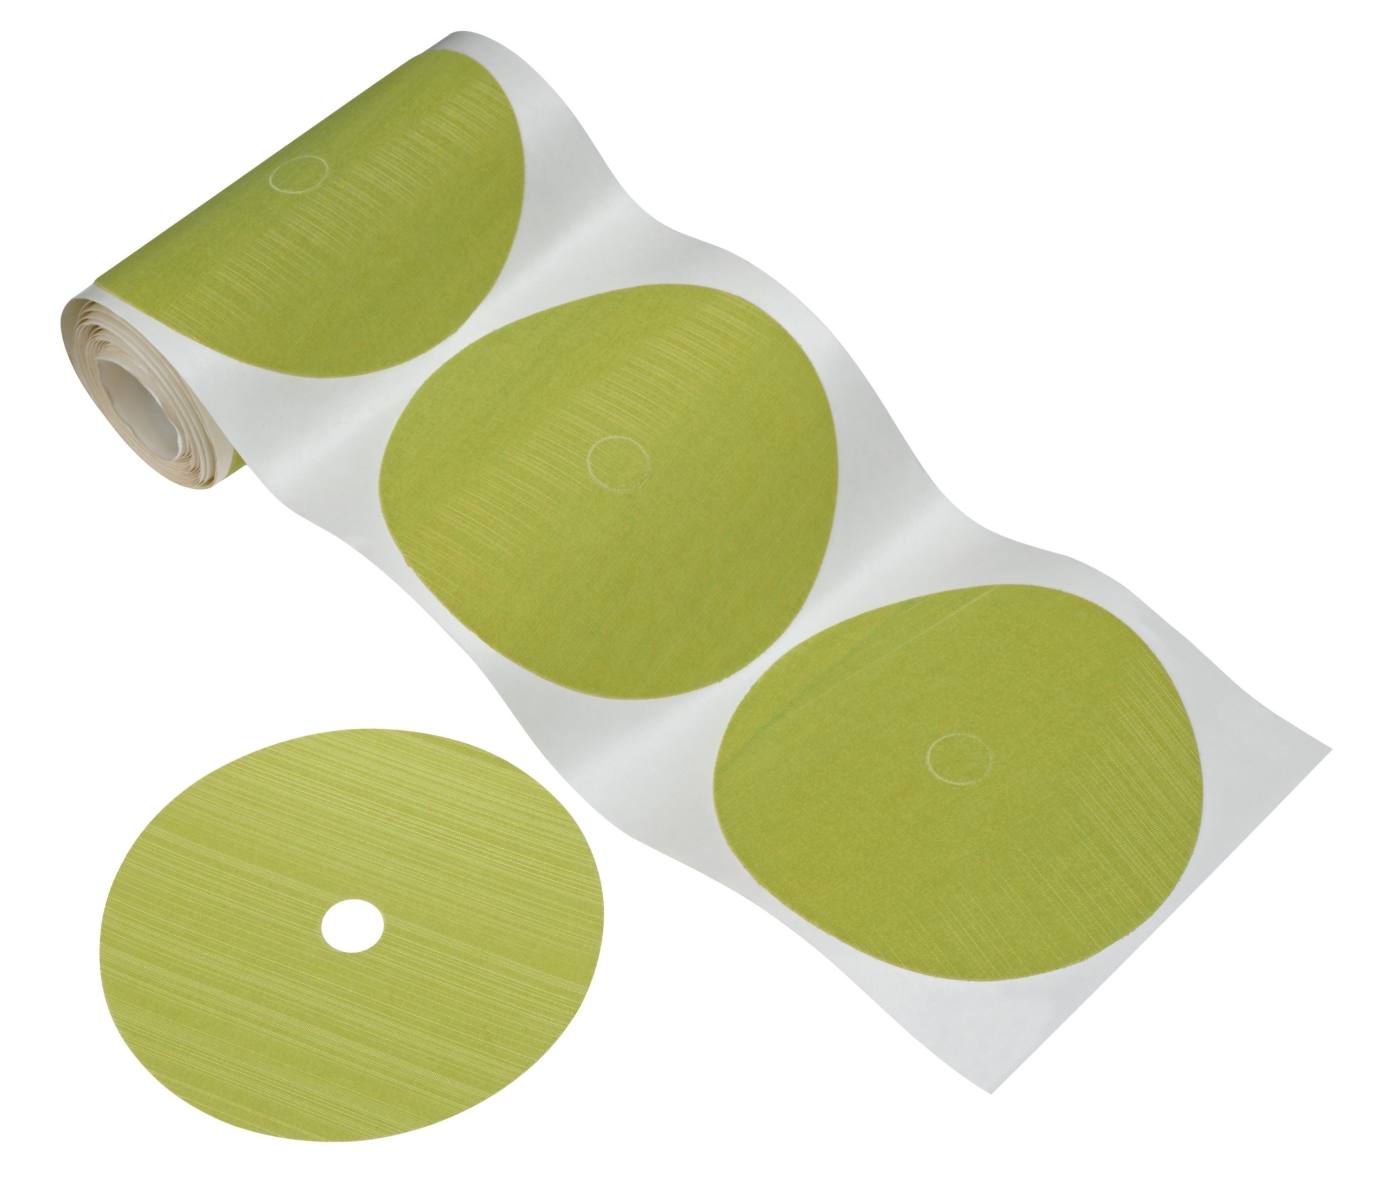 3M Trizact Structured film disc 268XA, 127mmx12.7m, green, A035 (roll of 100 discs) #94140